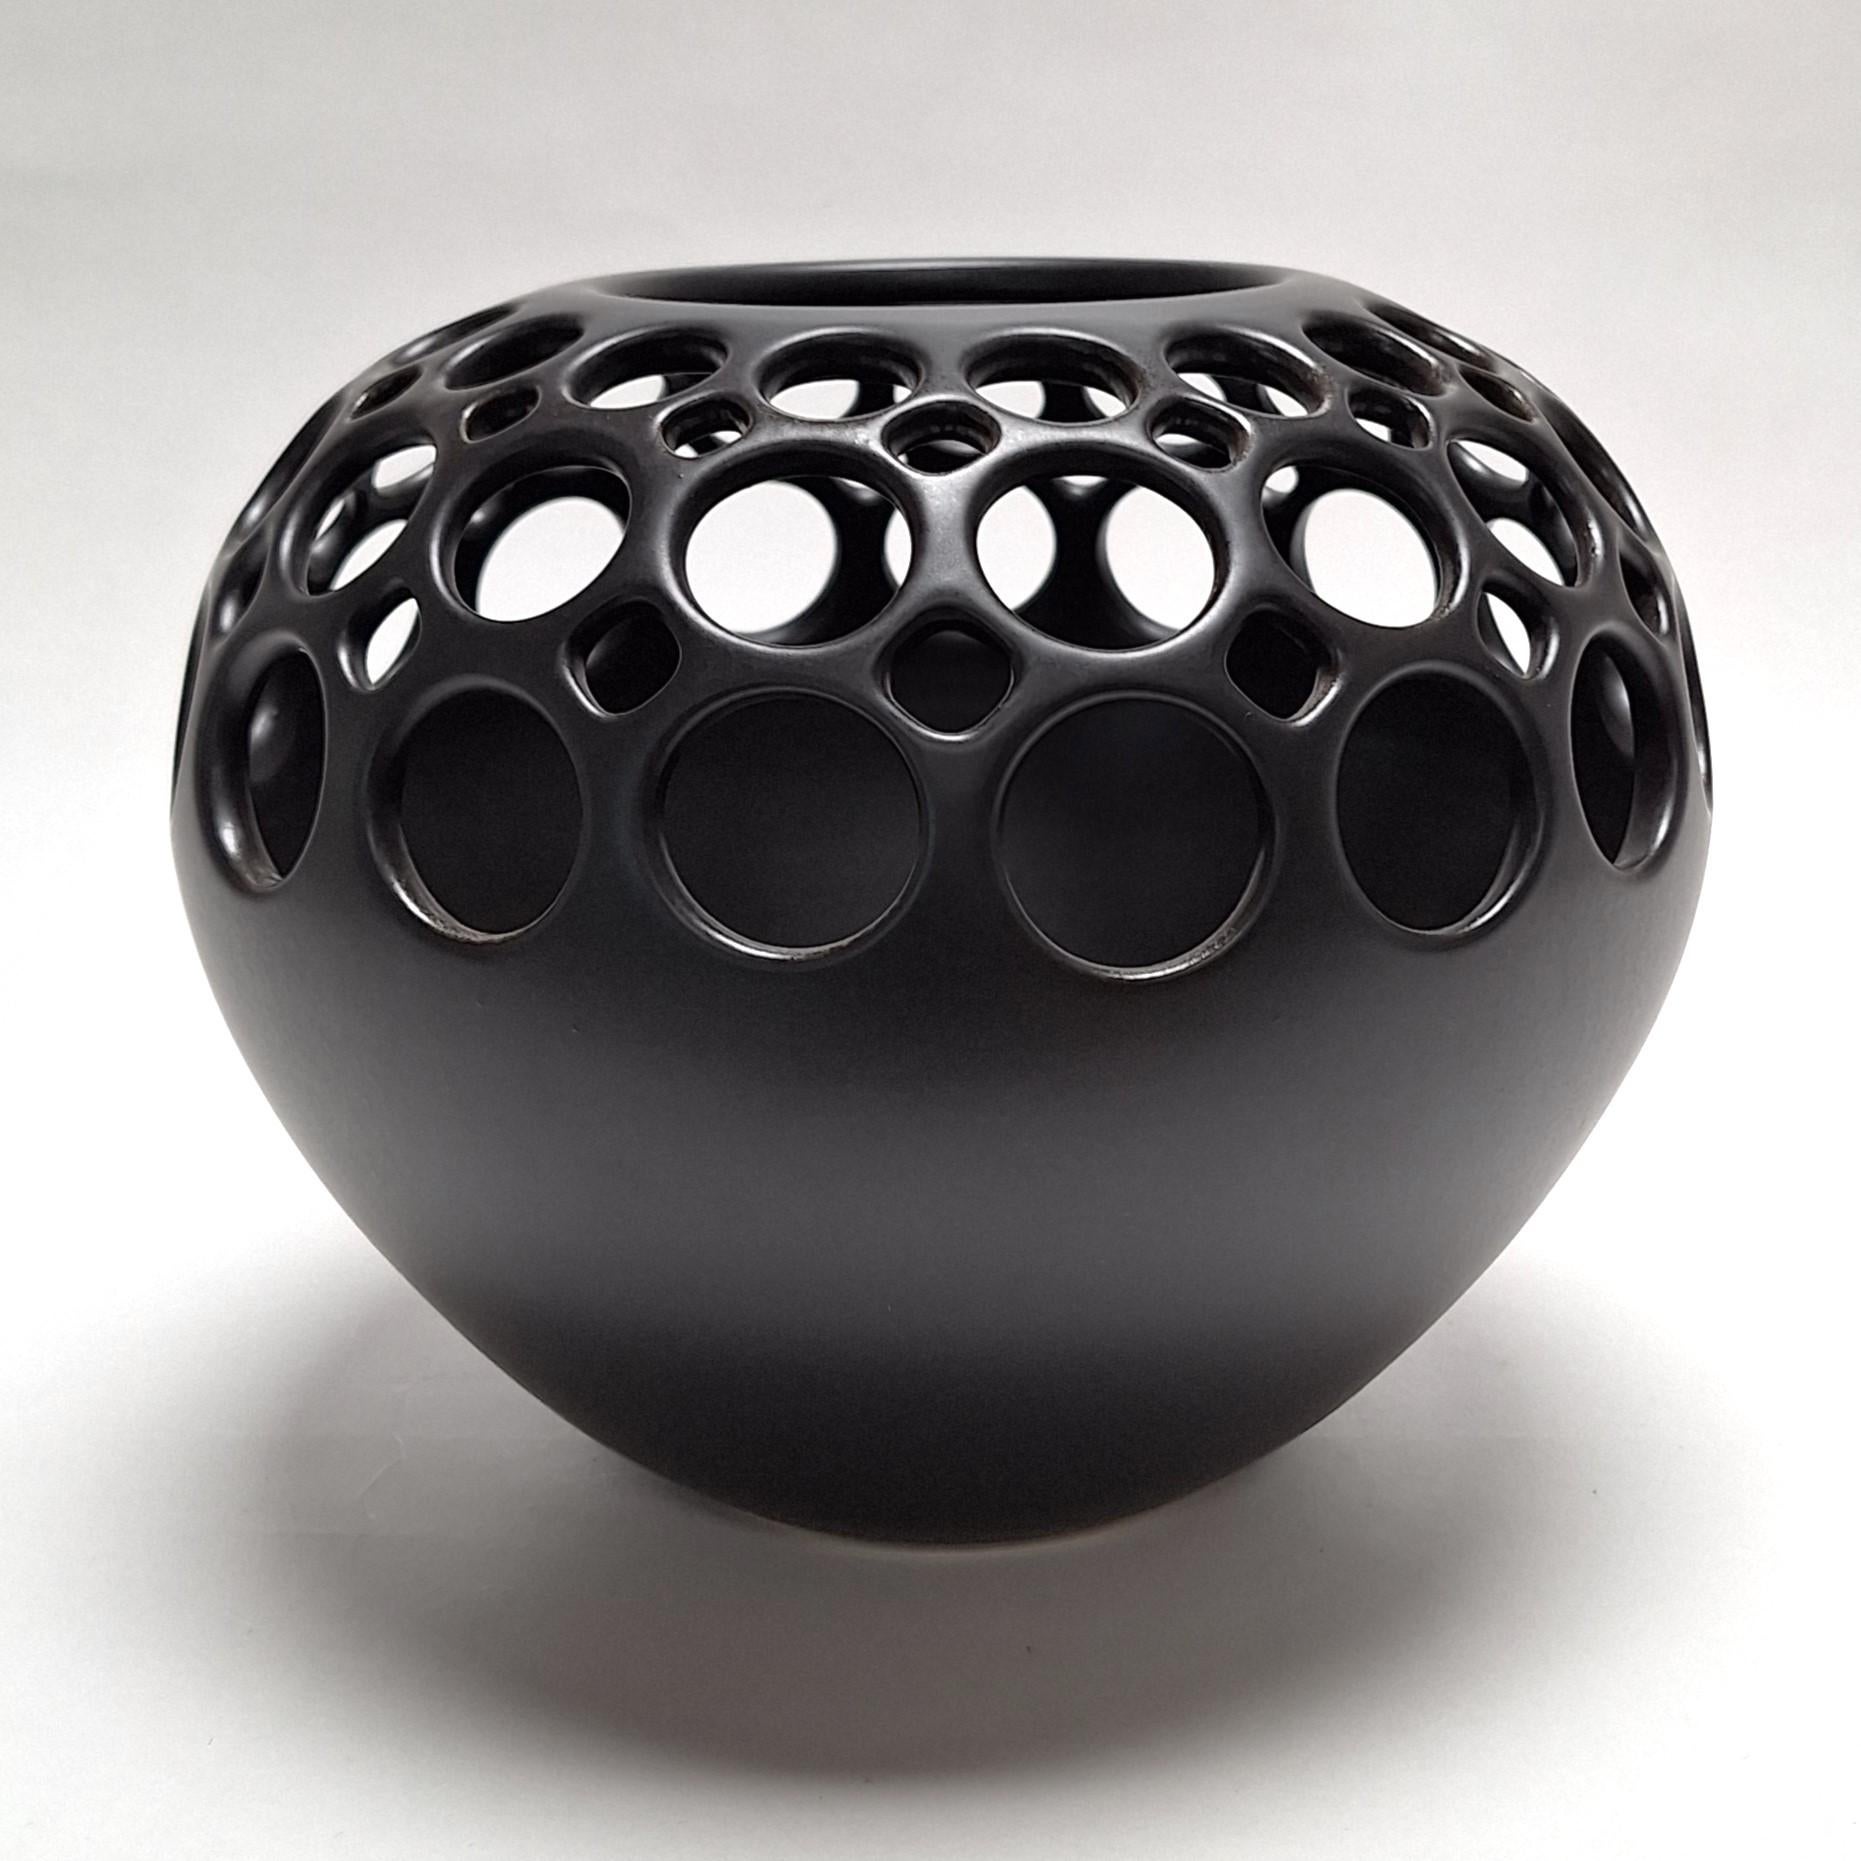 This Orb Demi Round Lace Black Vessel is a unique medium size contemporary modern ceramic object by Californian artist Lynne Meade. It is wheel thrown, hand pierced and has a smooth black satin glaze. Everything is done by eye, without molds or